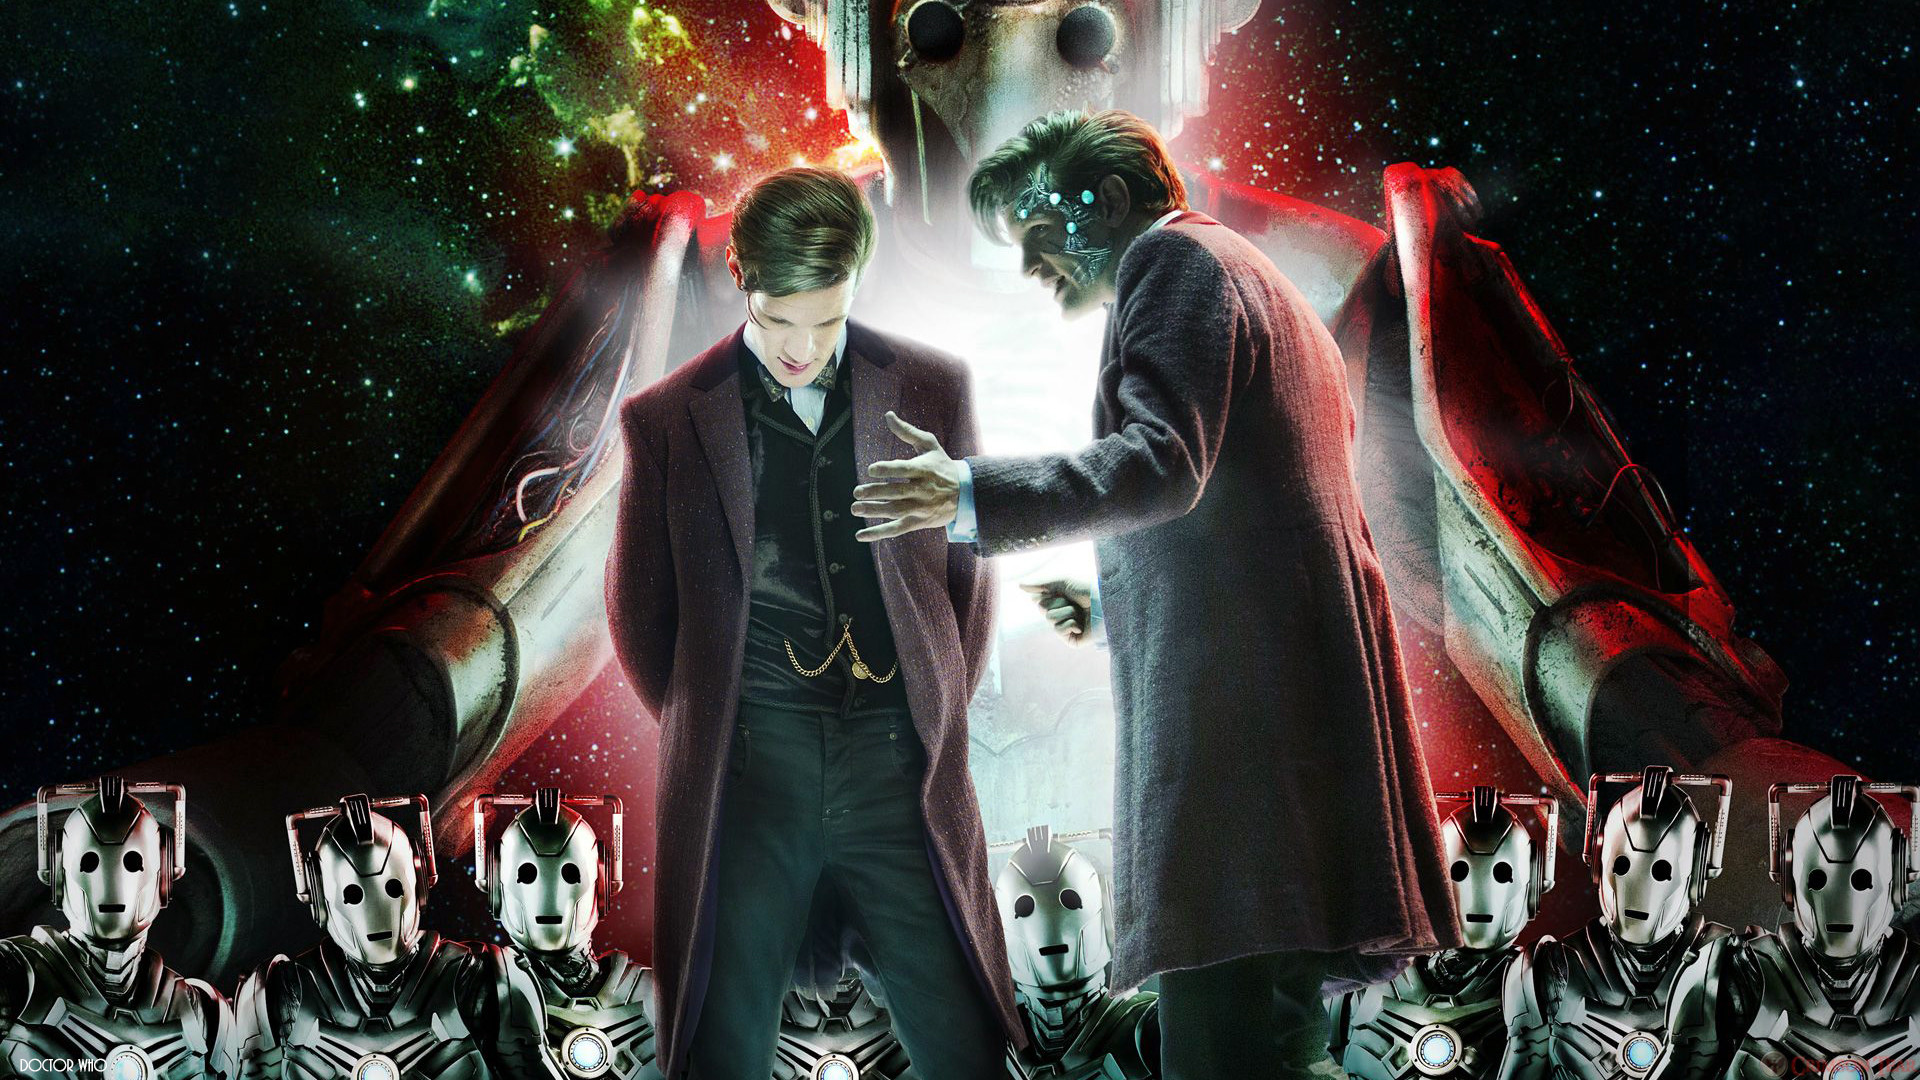 1920x1080 Doctor Who: Nightmare in Silver Wallpaper